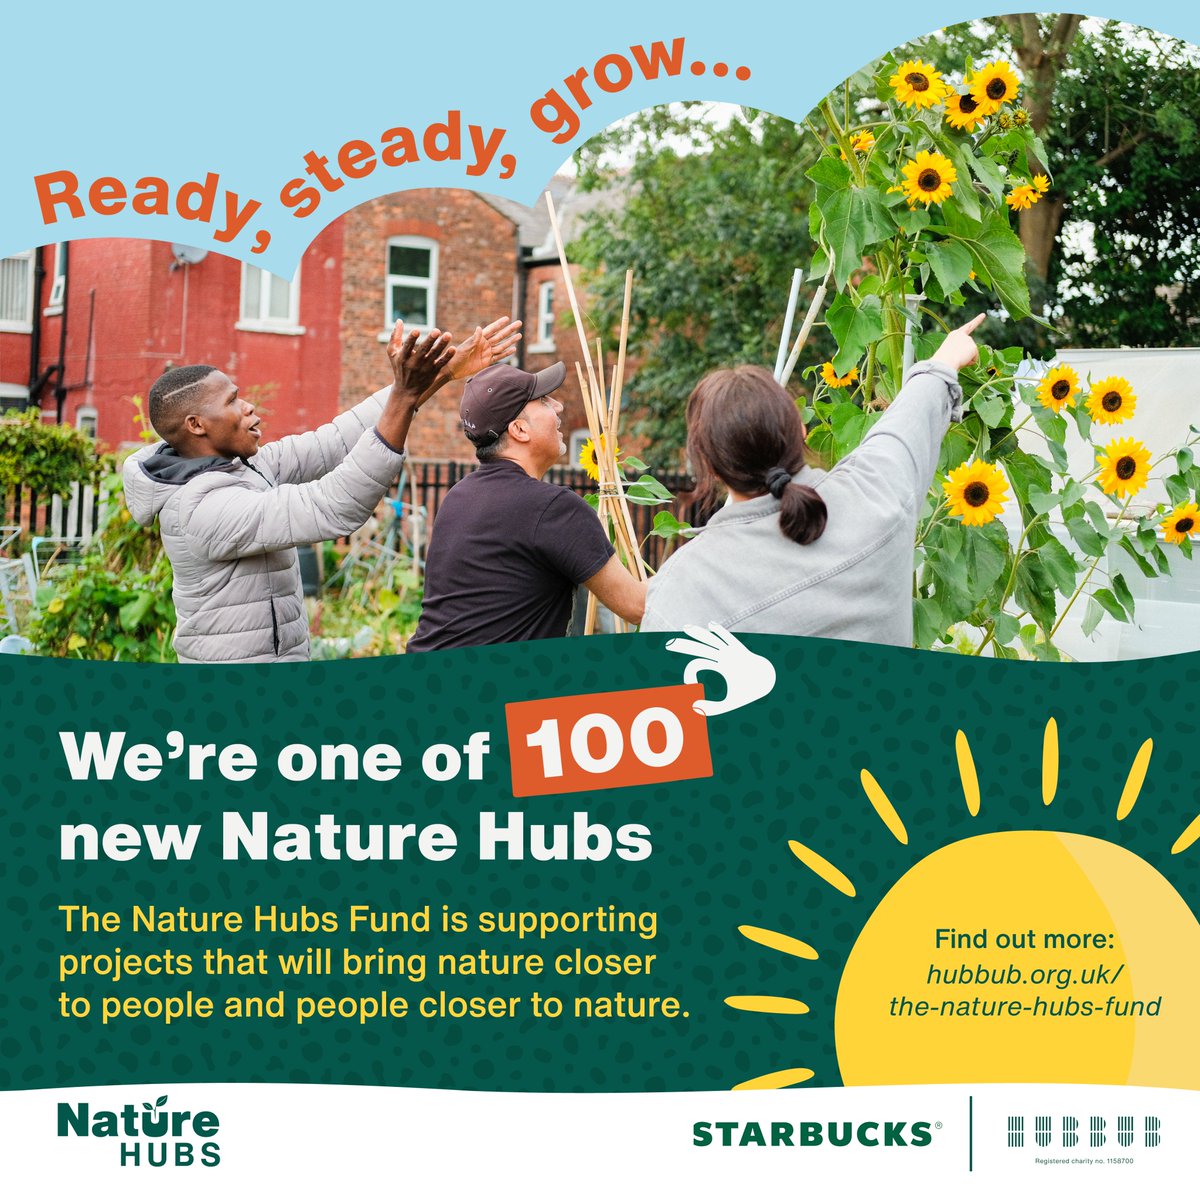 Great news! @GrowSpeke is one of 100 community nature projects in England, Scotland & Wales to receive funding from The Nature Hubs Fund. @hubbubUK polling shows 78% of us feel better for spending time in nature. We can't wait to help more people connect with nature! #NatureHubs